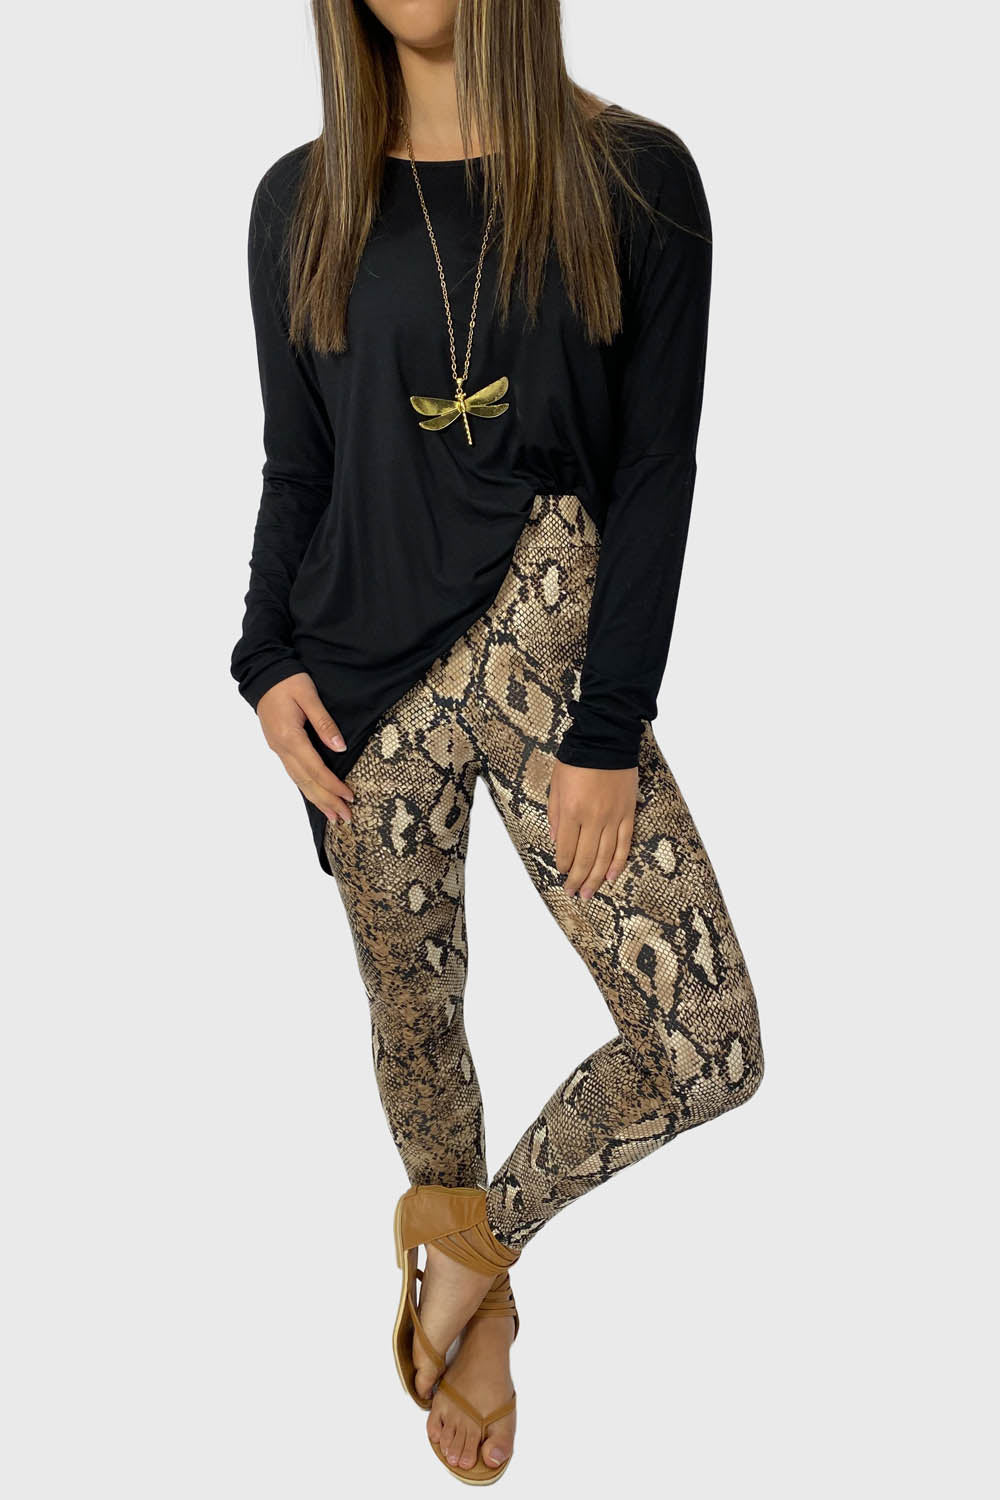 The Best Tights Ever – Vine Apparel